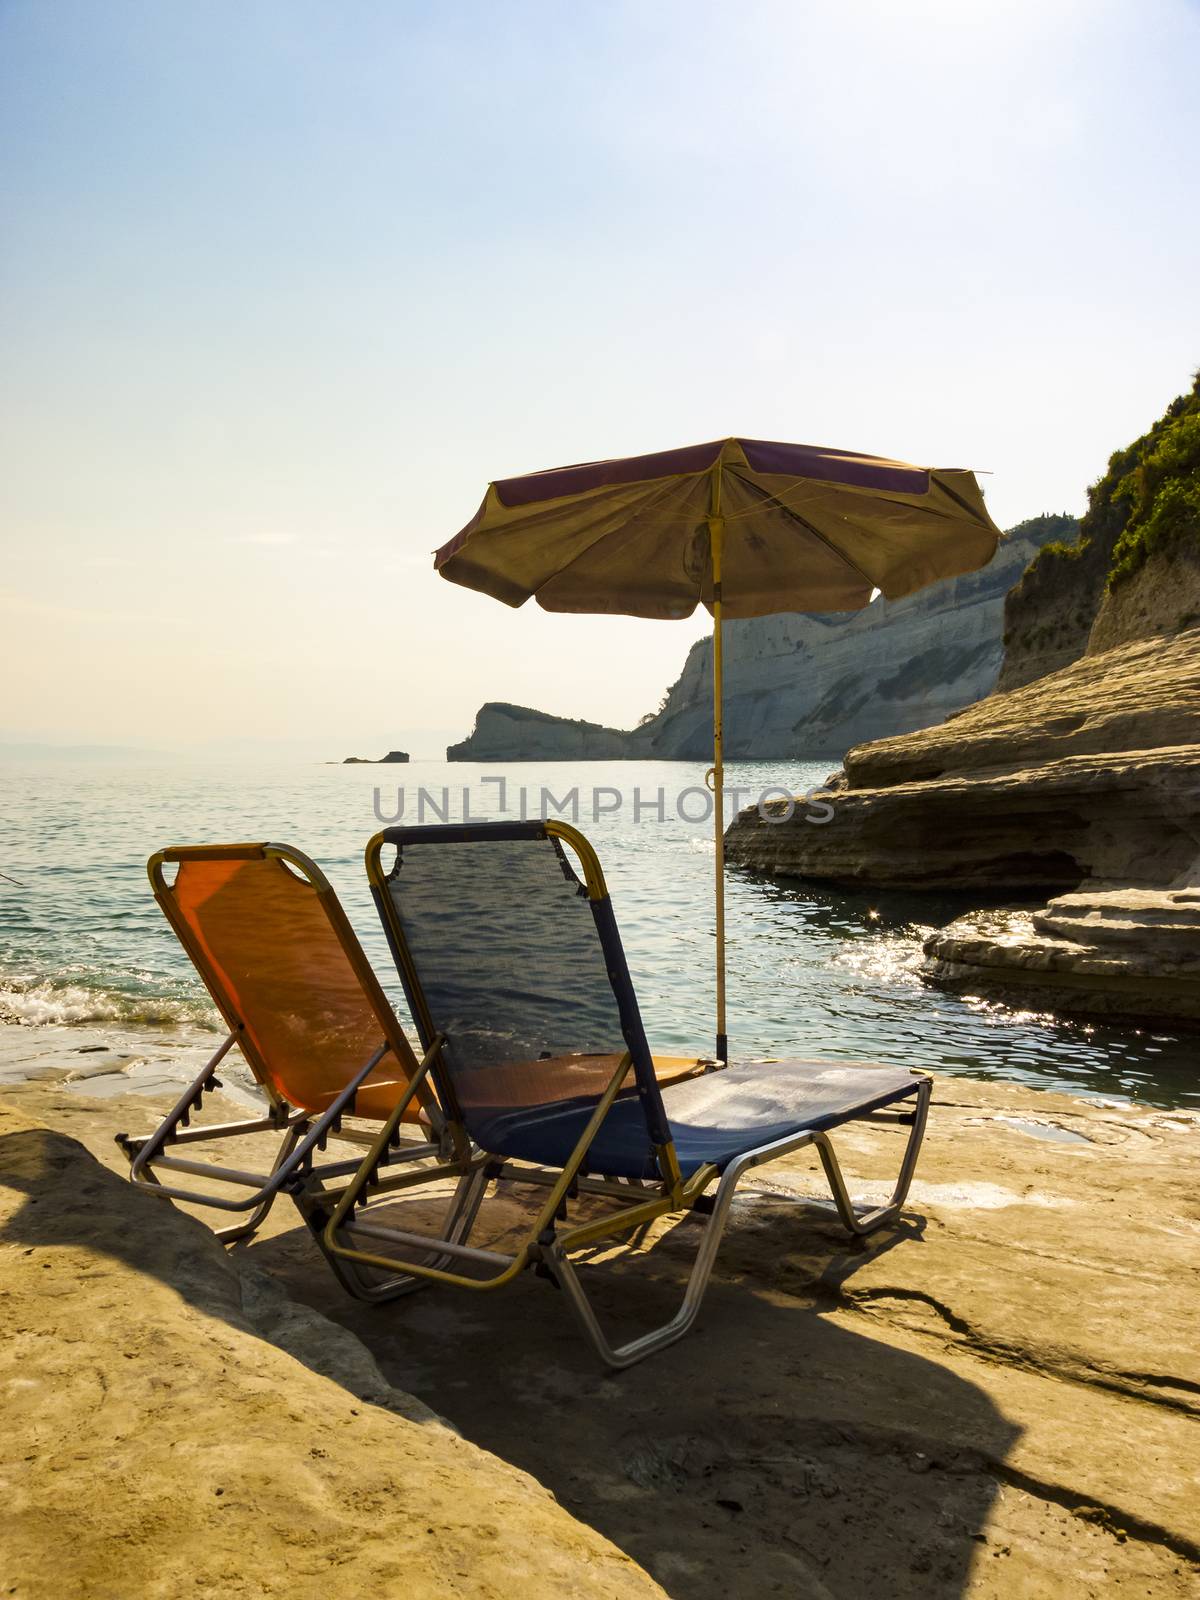 Sunbeds and umbrella on rocky beach in Corfu Island, Greece by ankarb